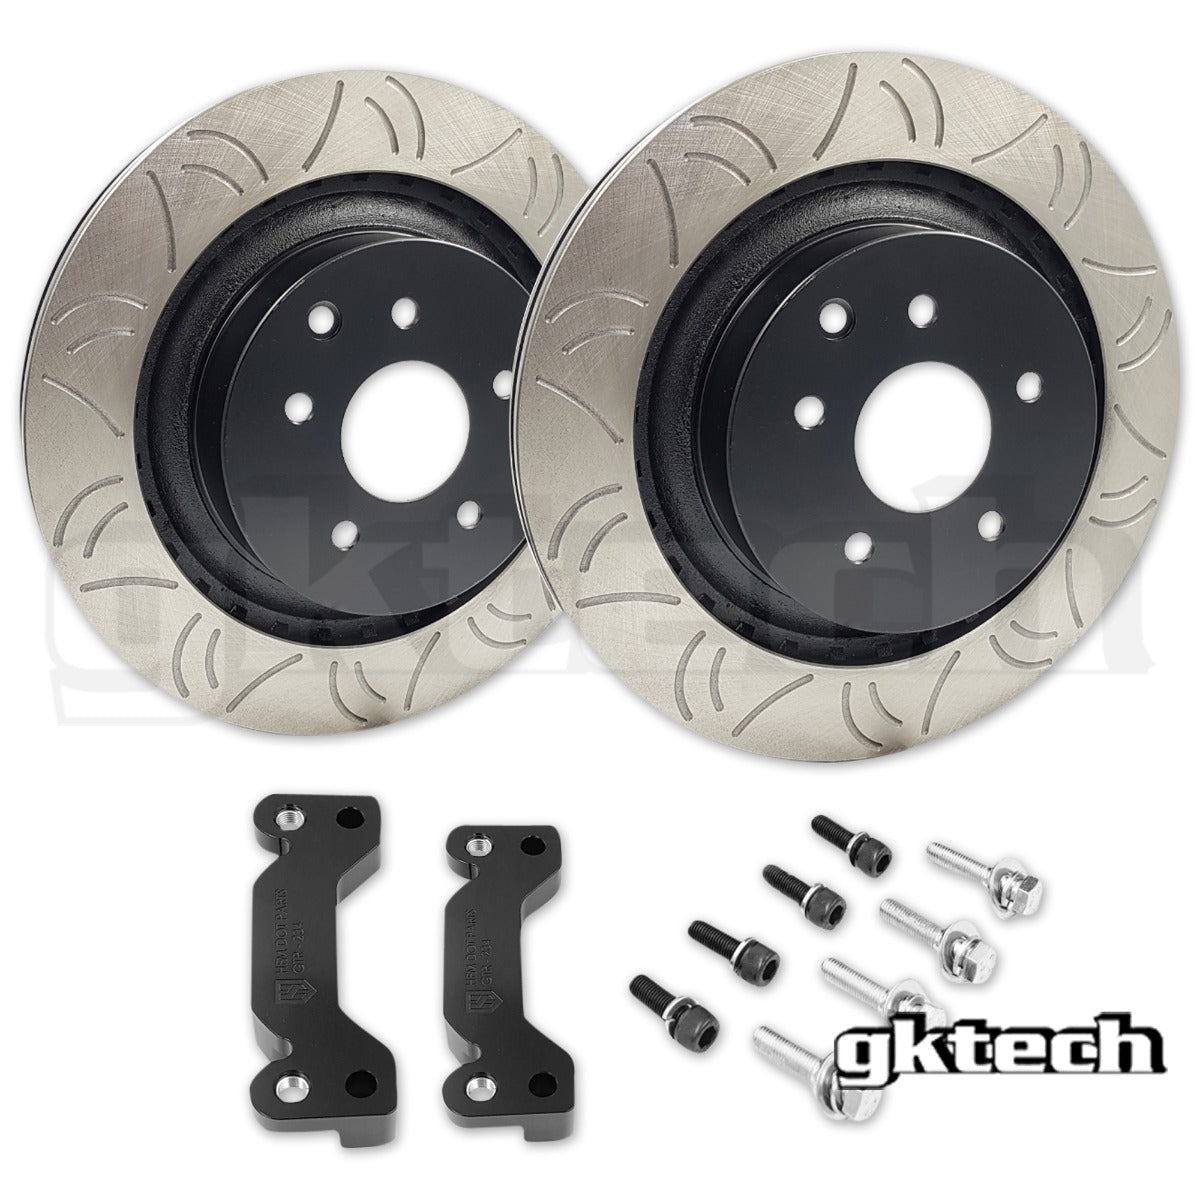 S/R Chassis Brembo 340mm Rear Rotor Upgrade Kit